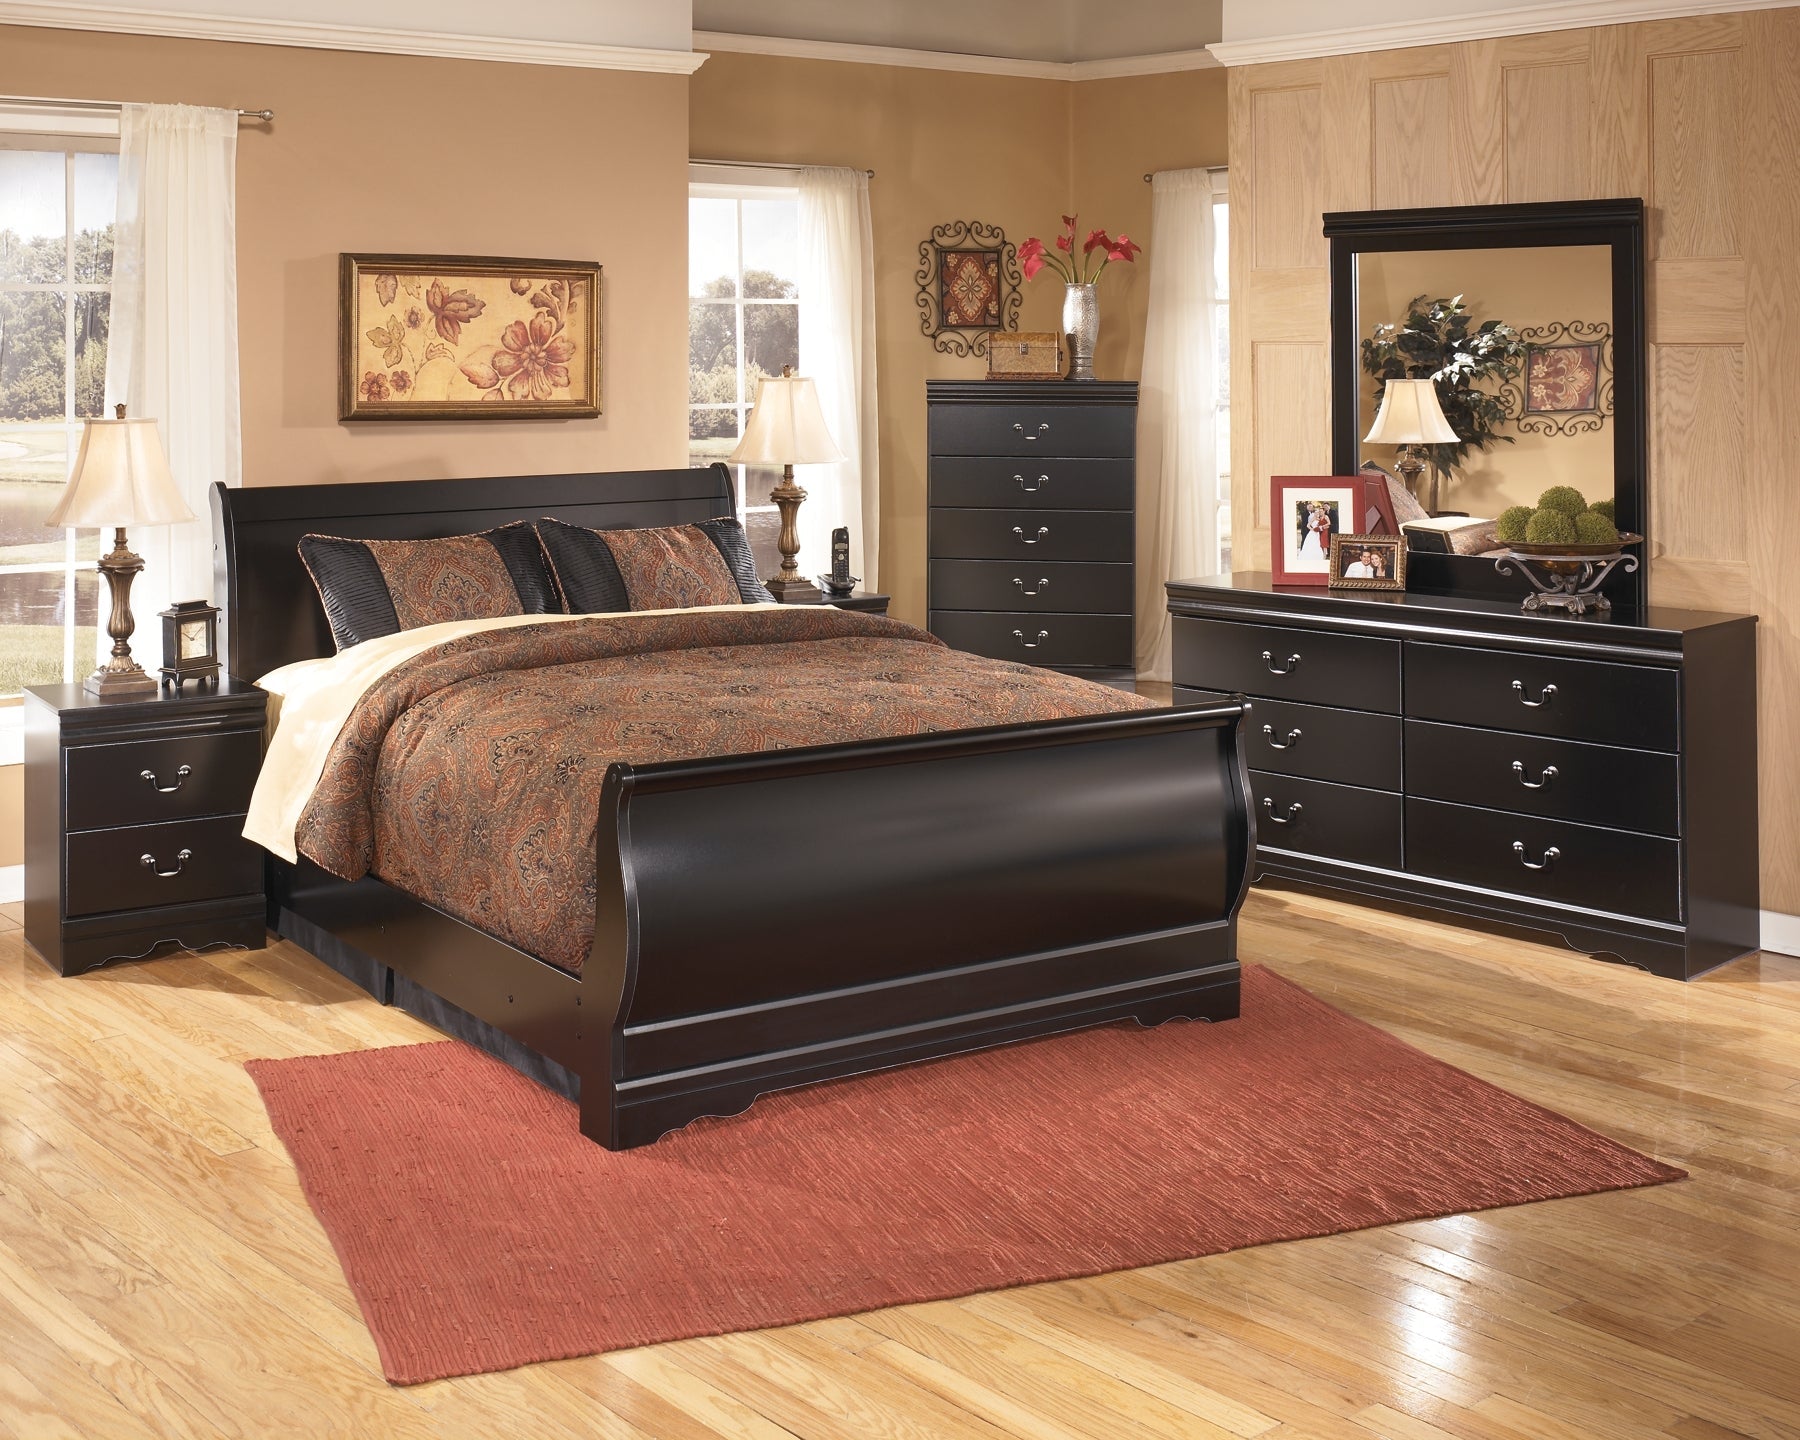 Huey Vineyard Dresser and Mirror at Walker Mattress and Furniture Locations in Cedar Park and Belton TX.